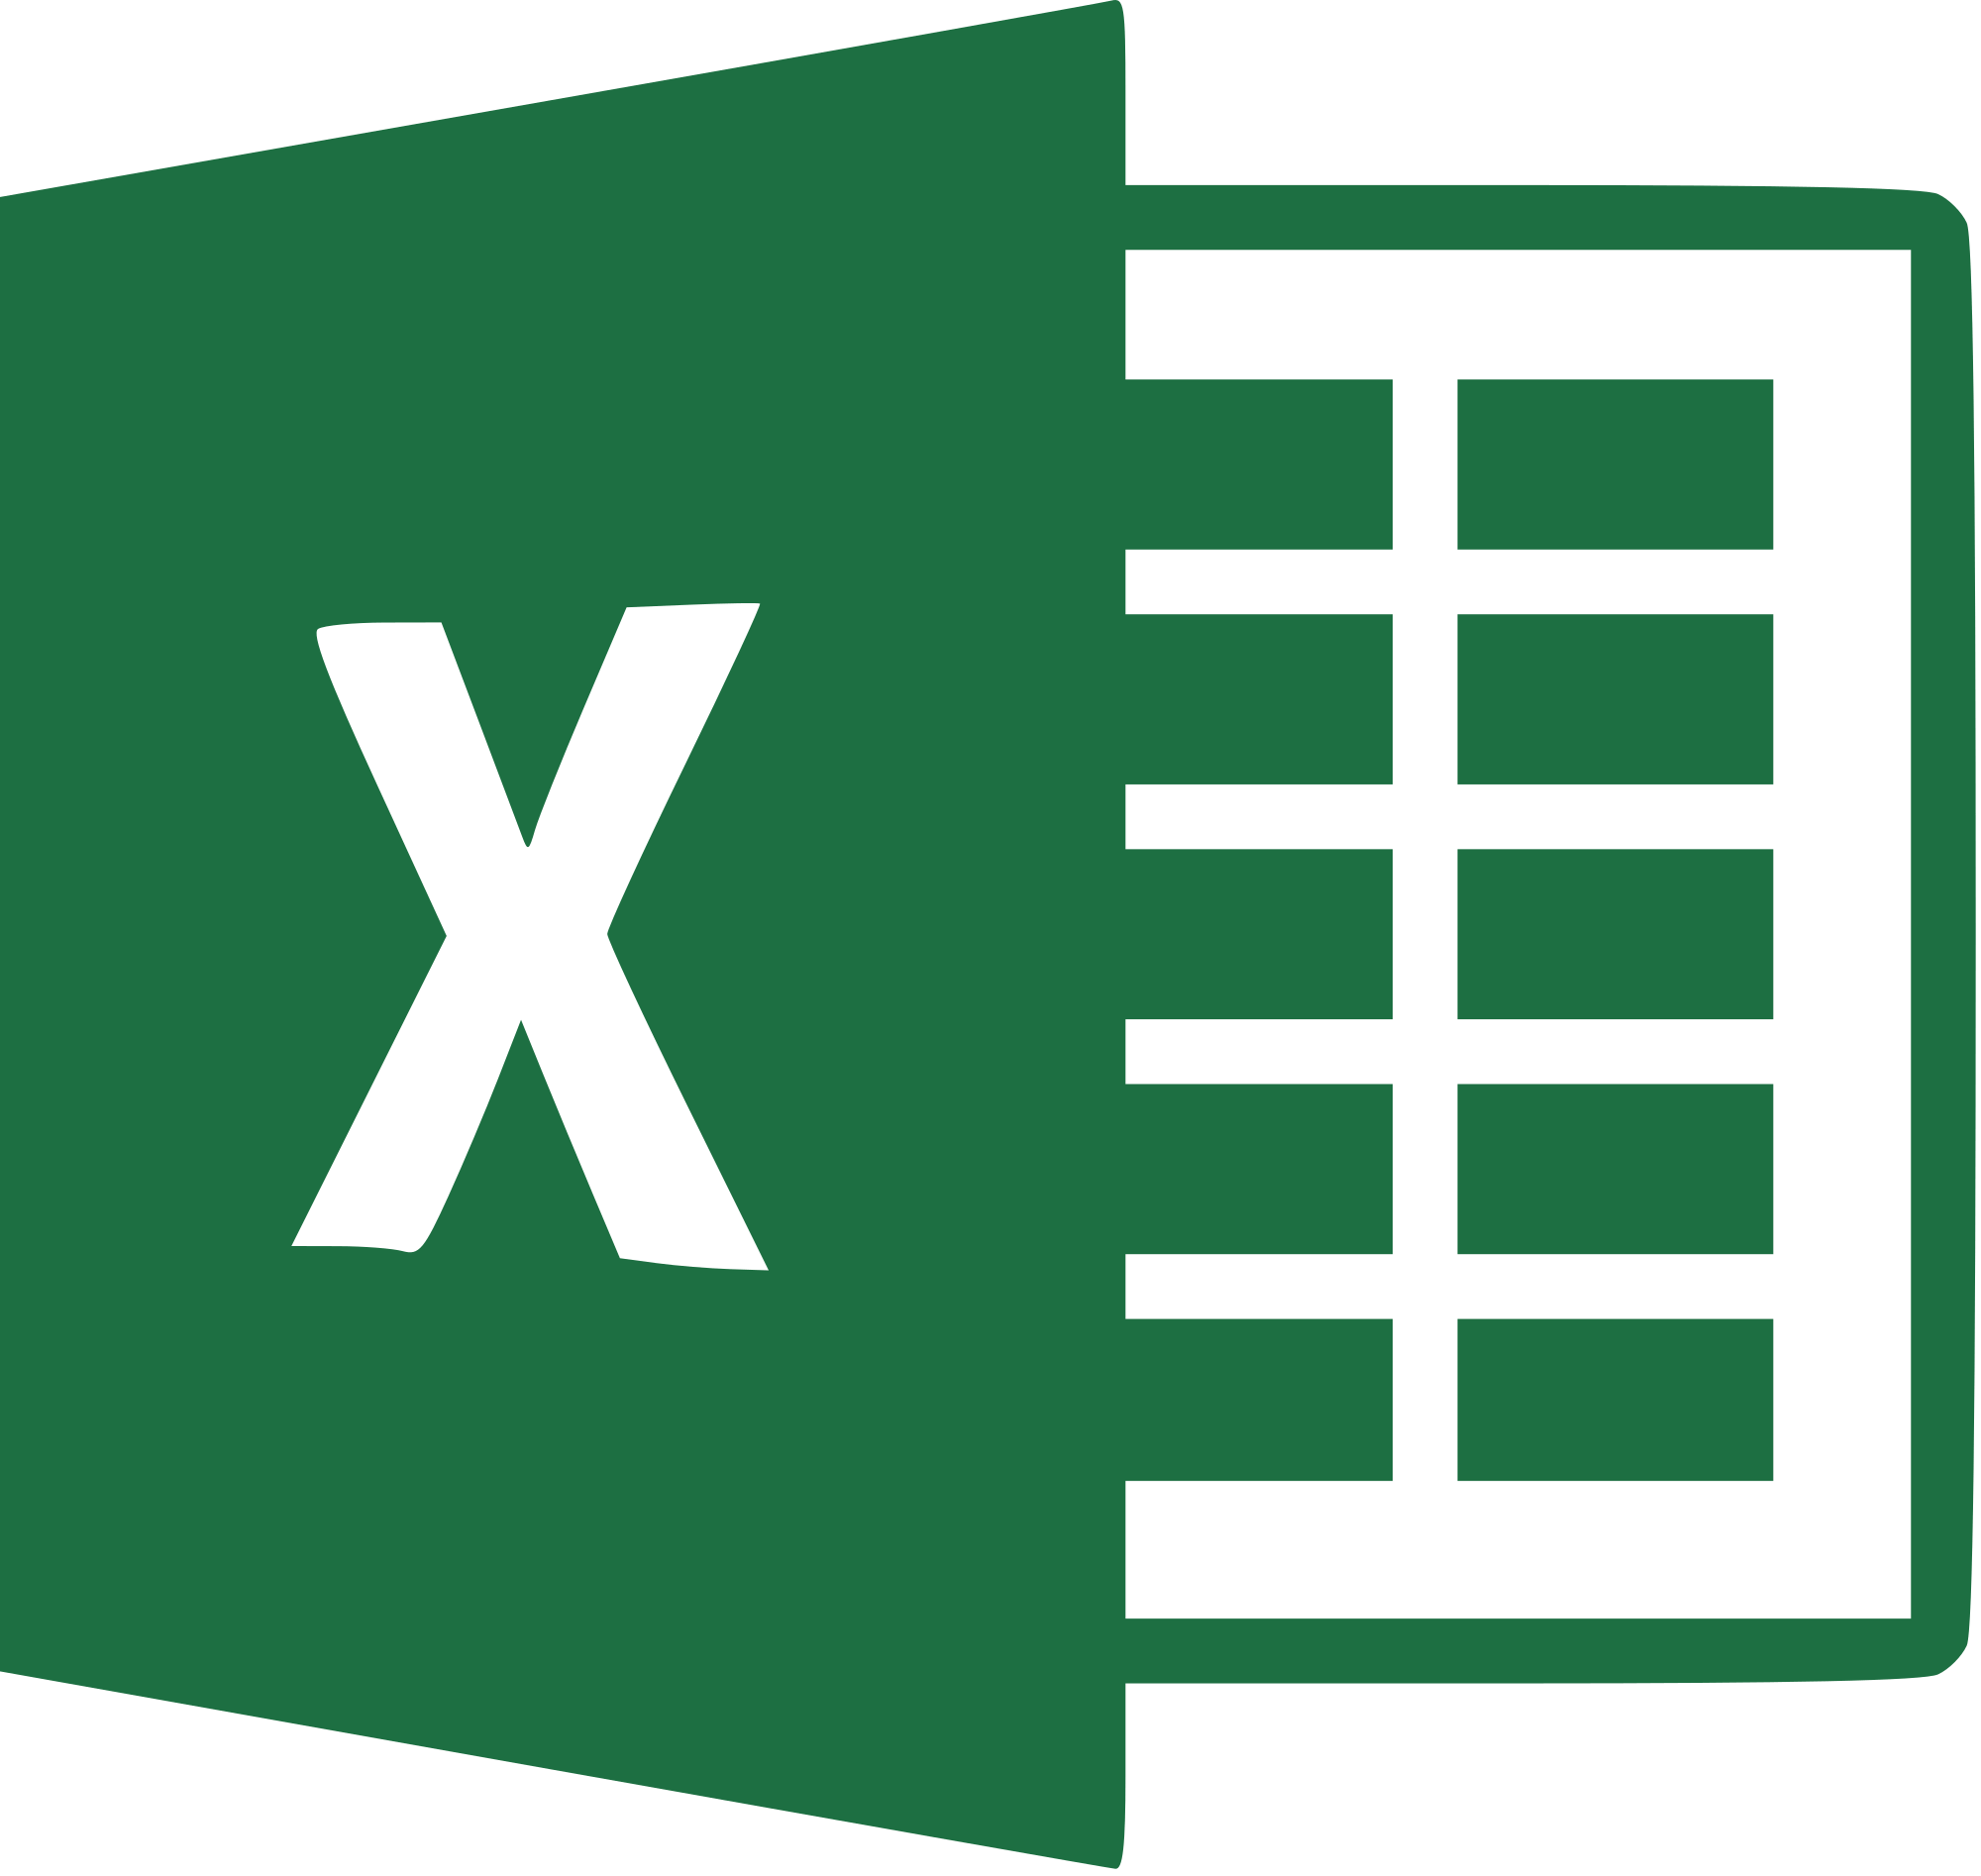 Excel Office 2013 Logo - File:Microsoft Office Excel (2013–present).svg - Wikimedia Commons